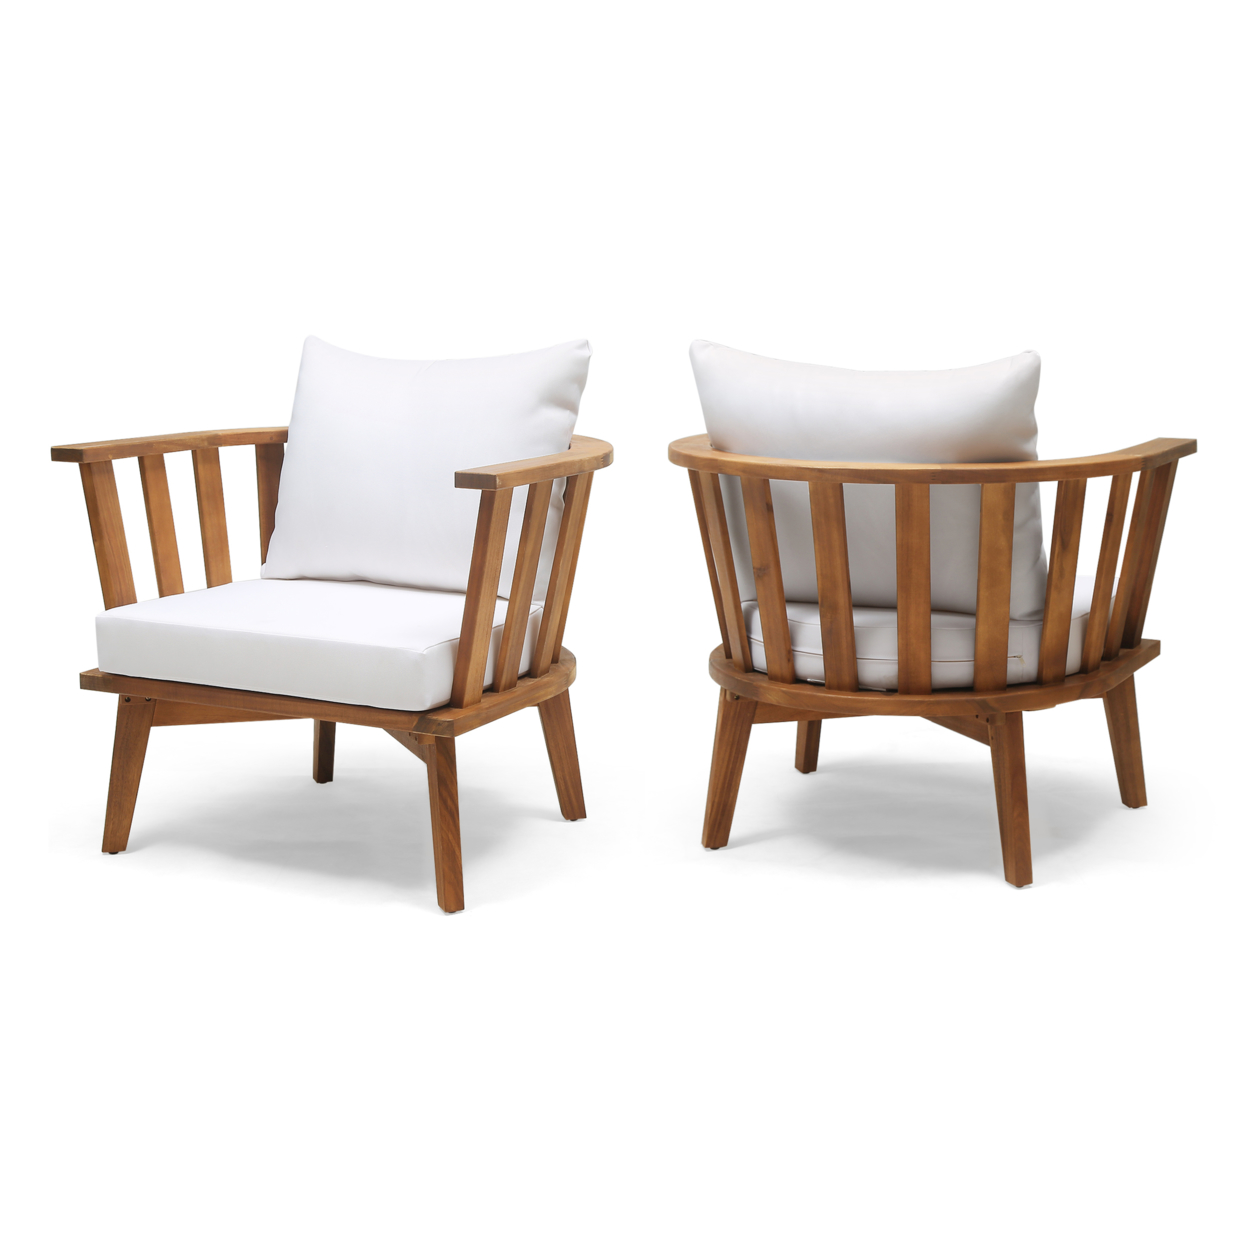 Dean Outdoor Wooden Club Chair With Cushions (Set Of 2)